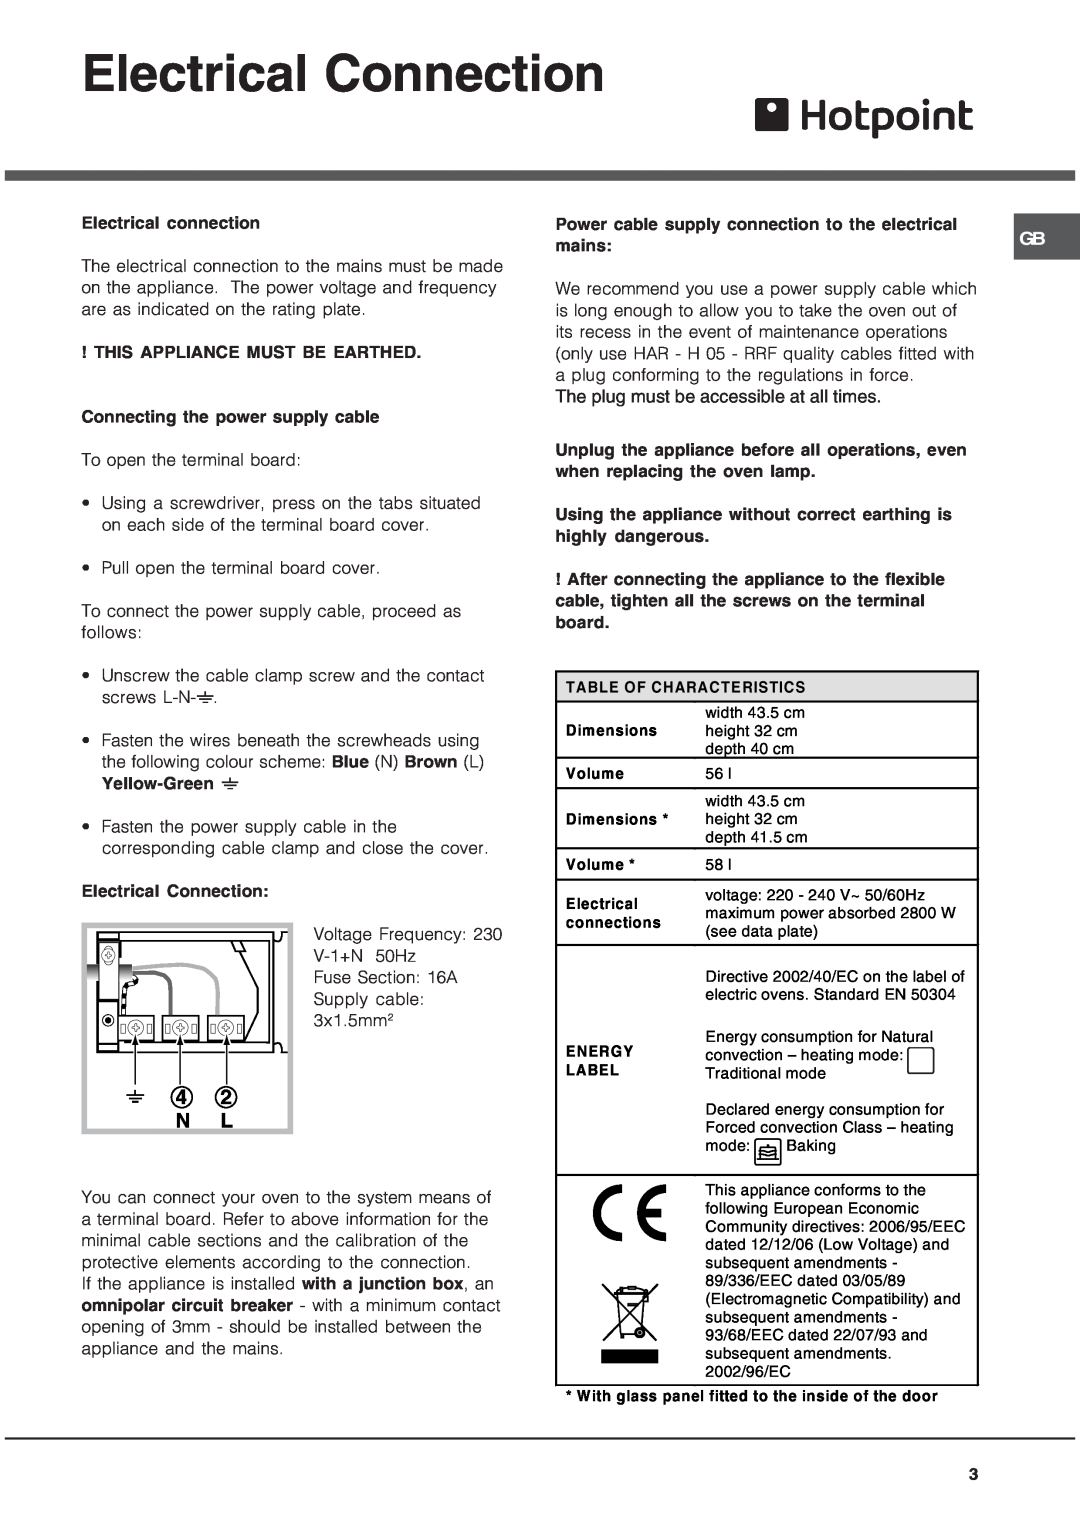 Hotpoint SE89PG X, SY89PG manual Electrical Connection, 4 2 N L, The plug must be accessible at all times 